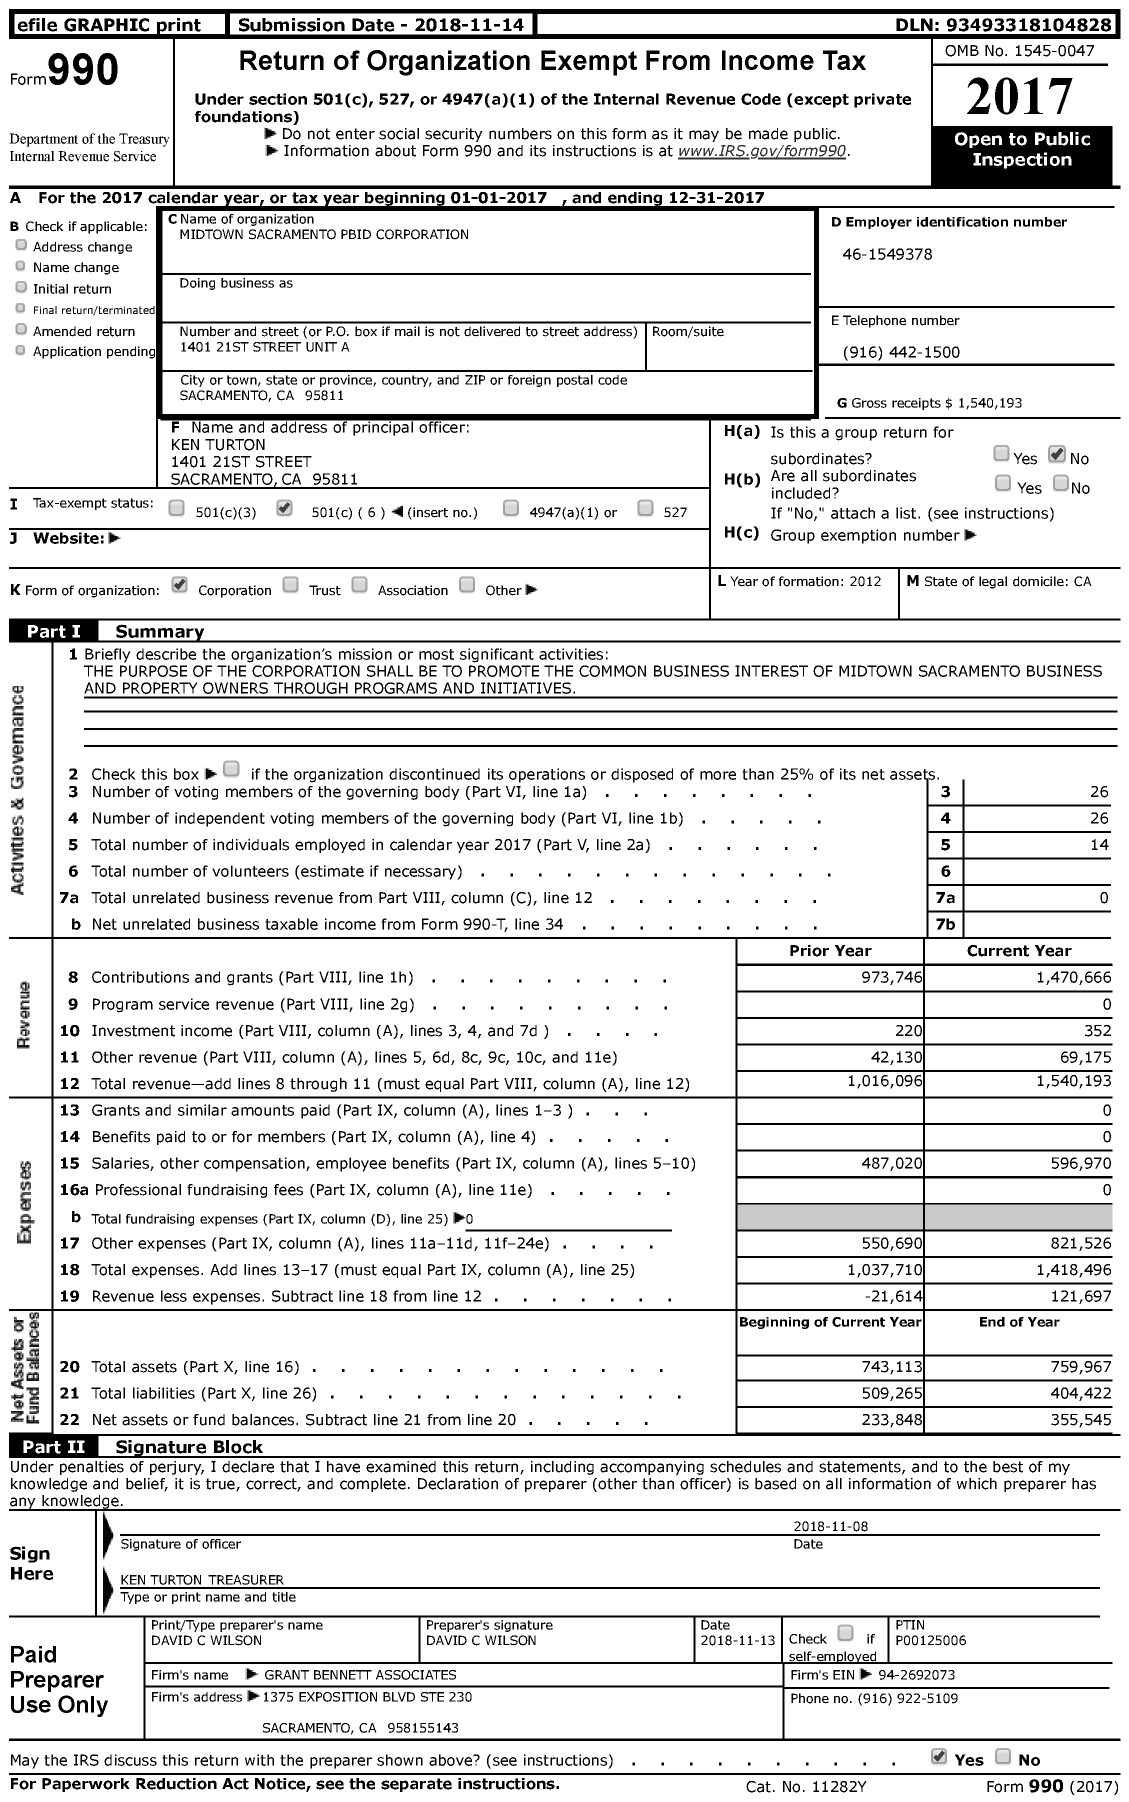 Image of first page of 2017 Form 990 for Midtown Sacramento PBID Corporation